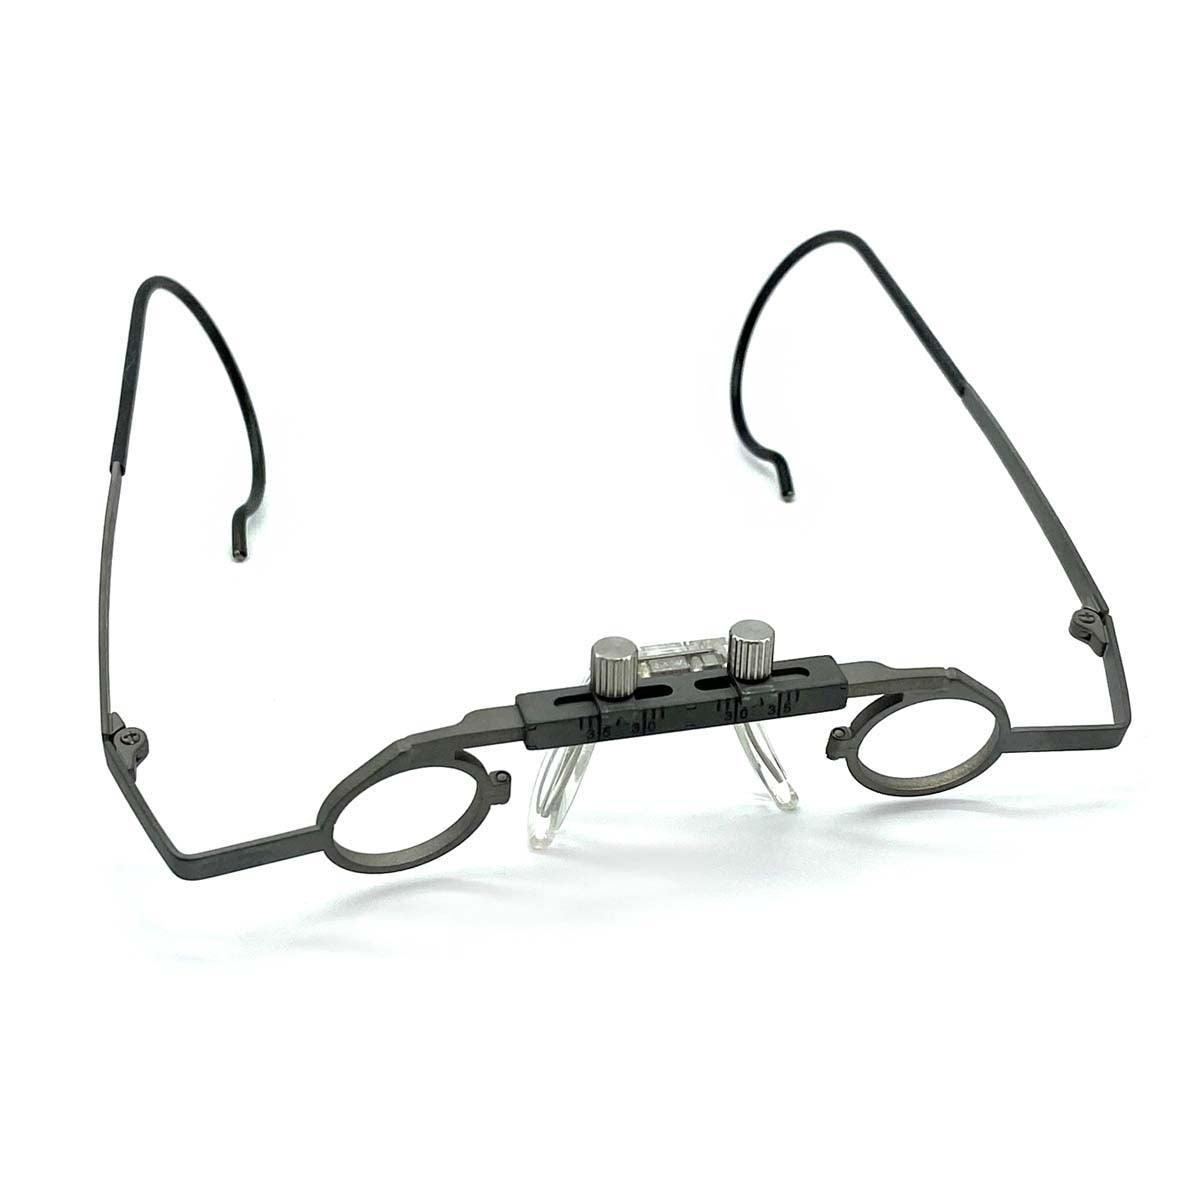 4.0 D Walters Full Frame Clip on Magnifier Glasses